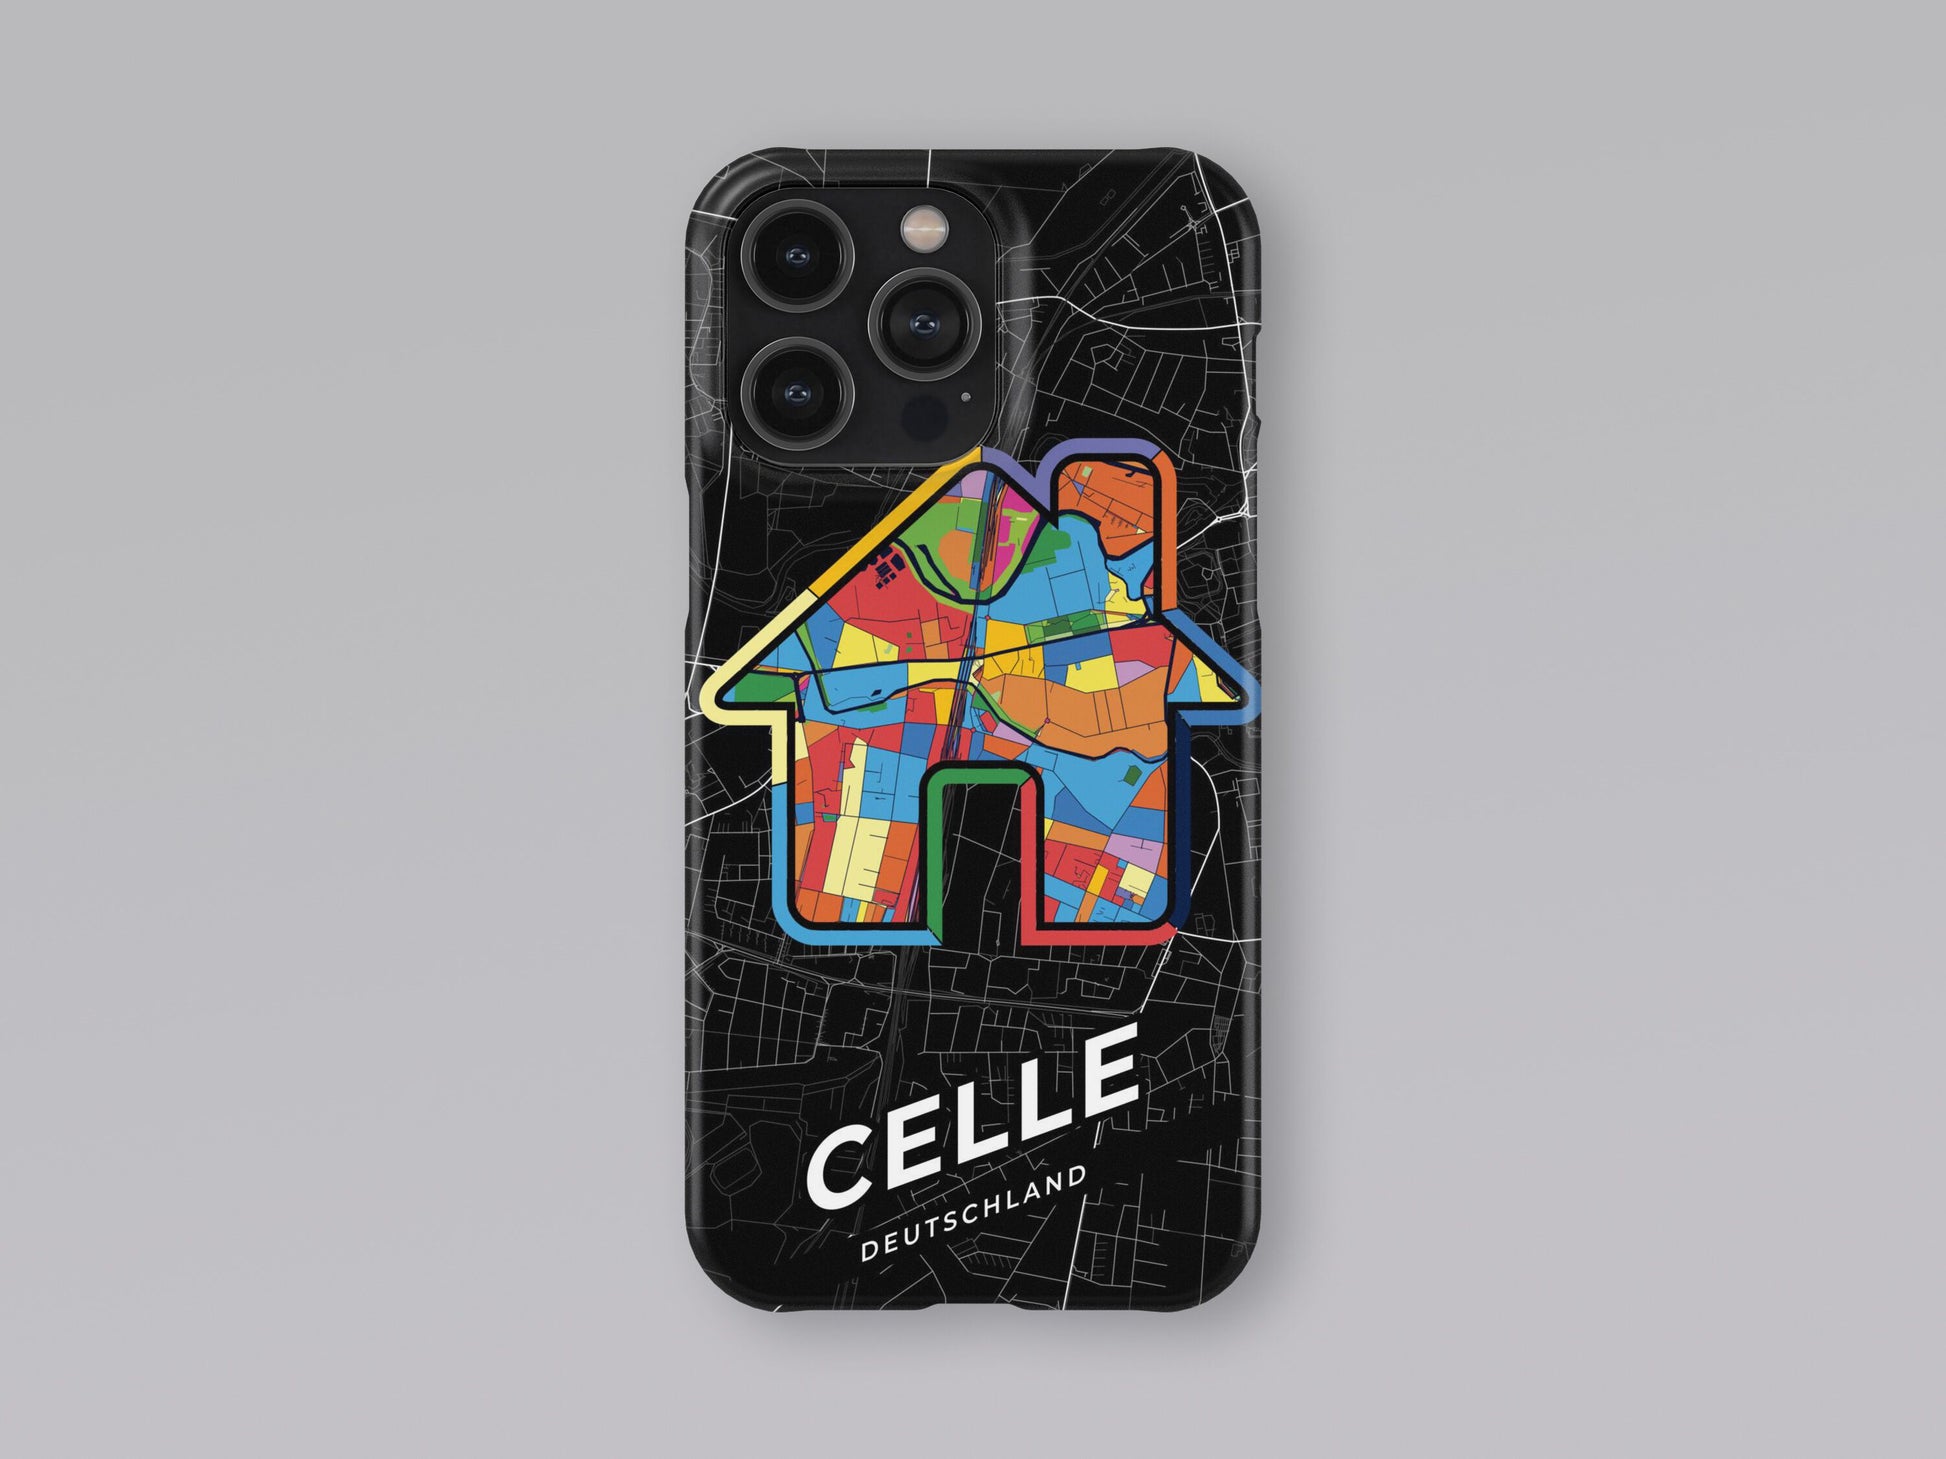 Celle Deutschland slim phone case with colorful icon. Birthday, wedding or housewarming gift. Couple match cases. 3